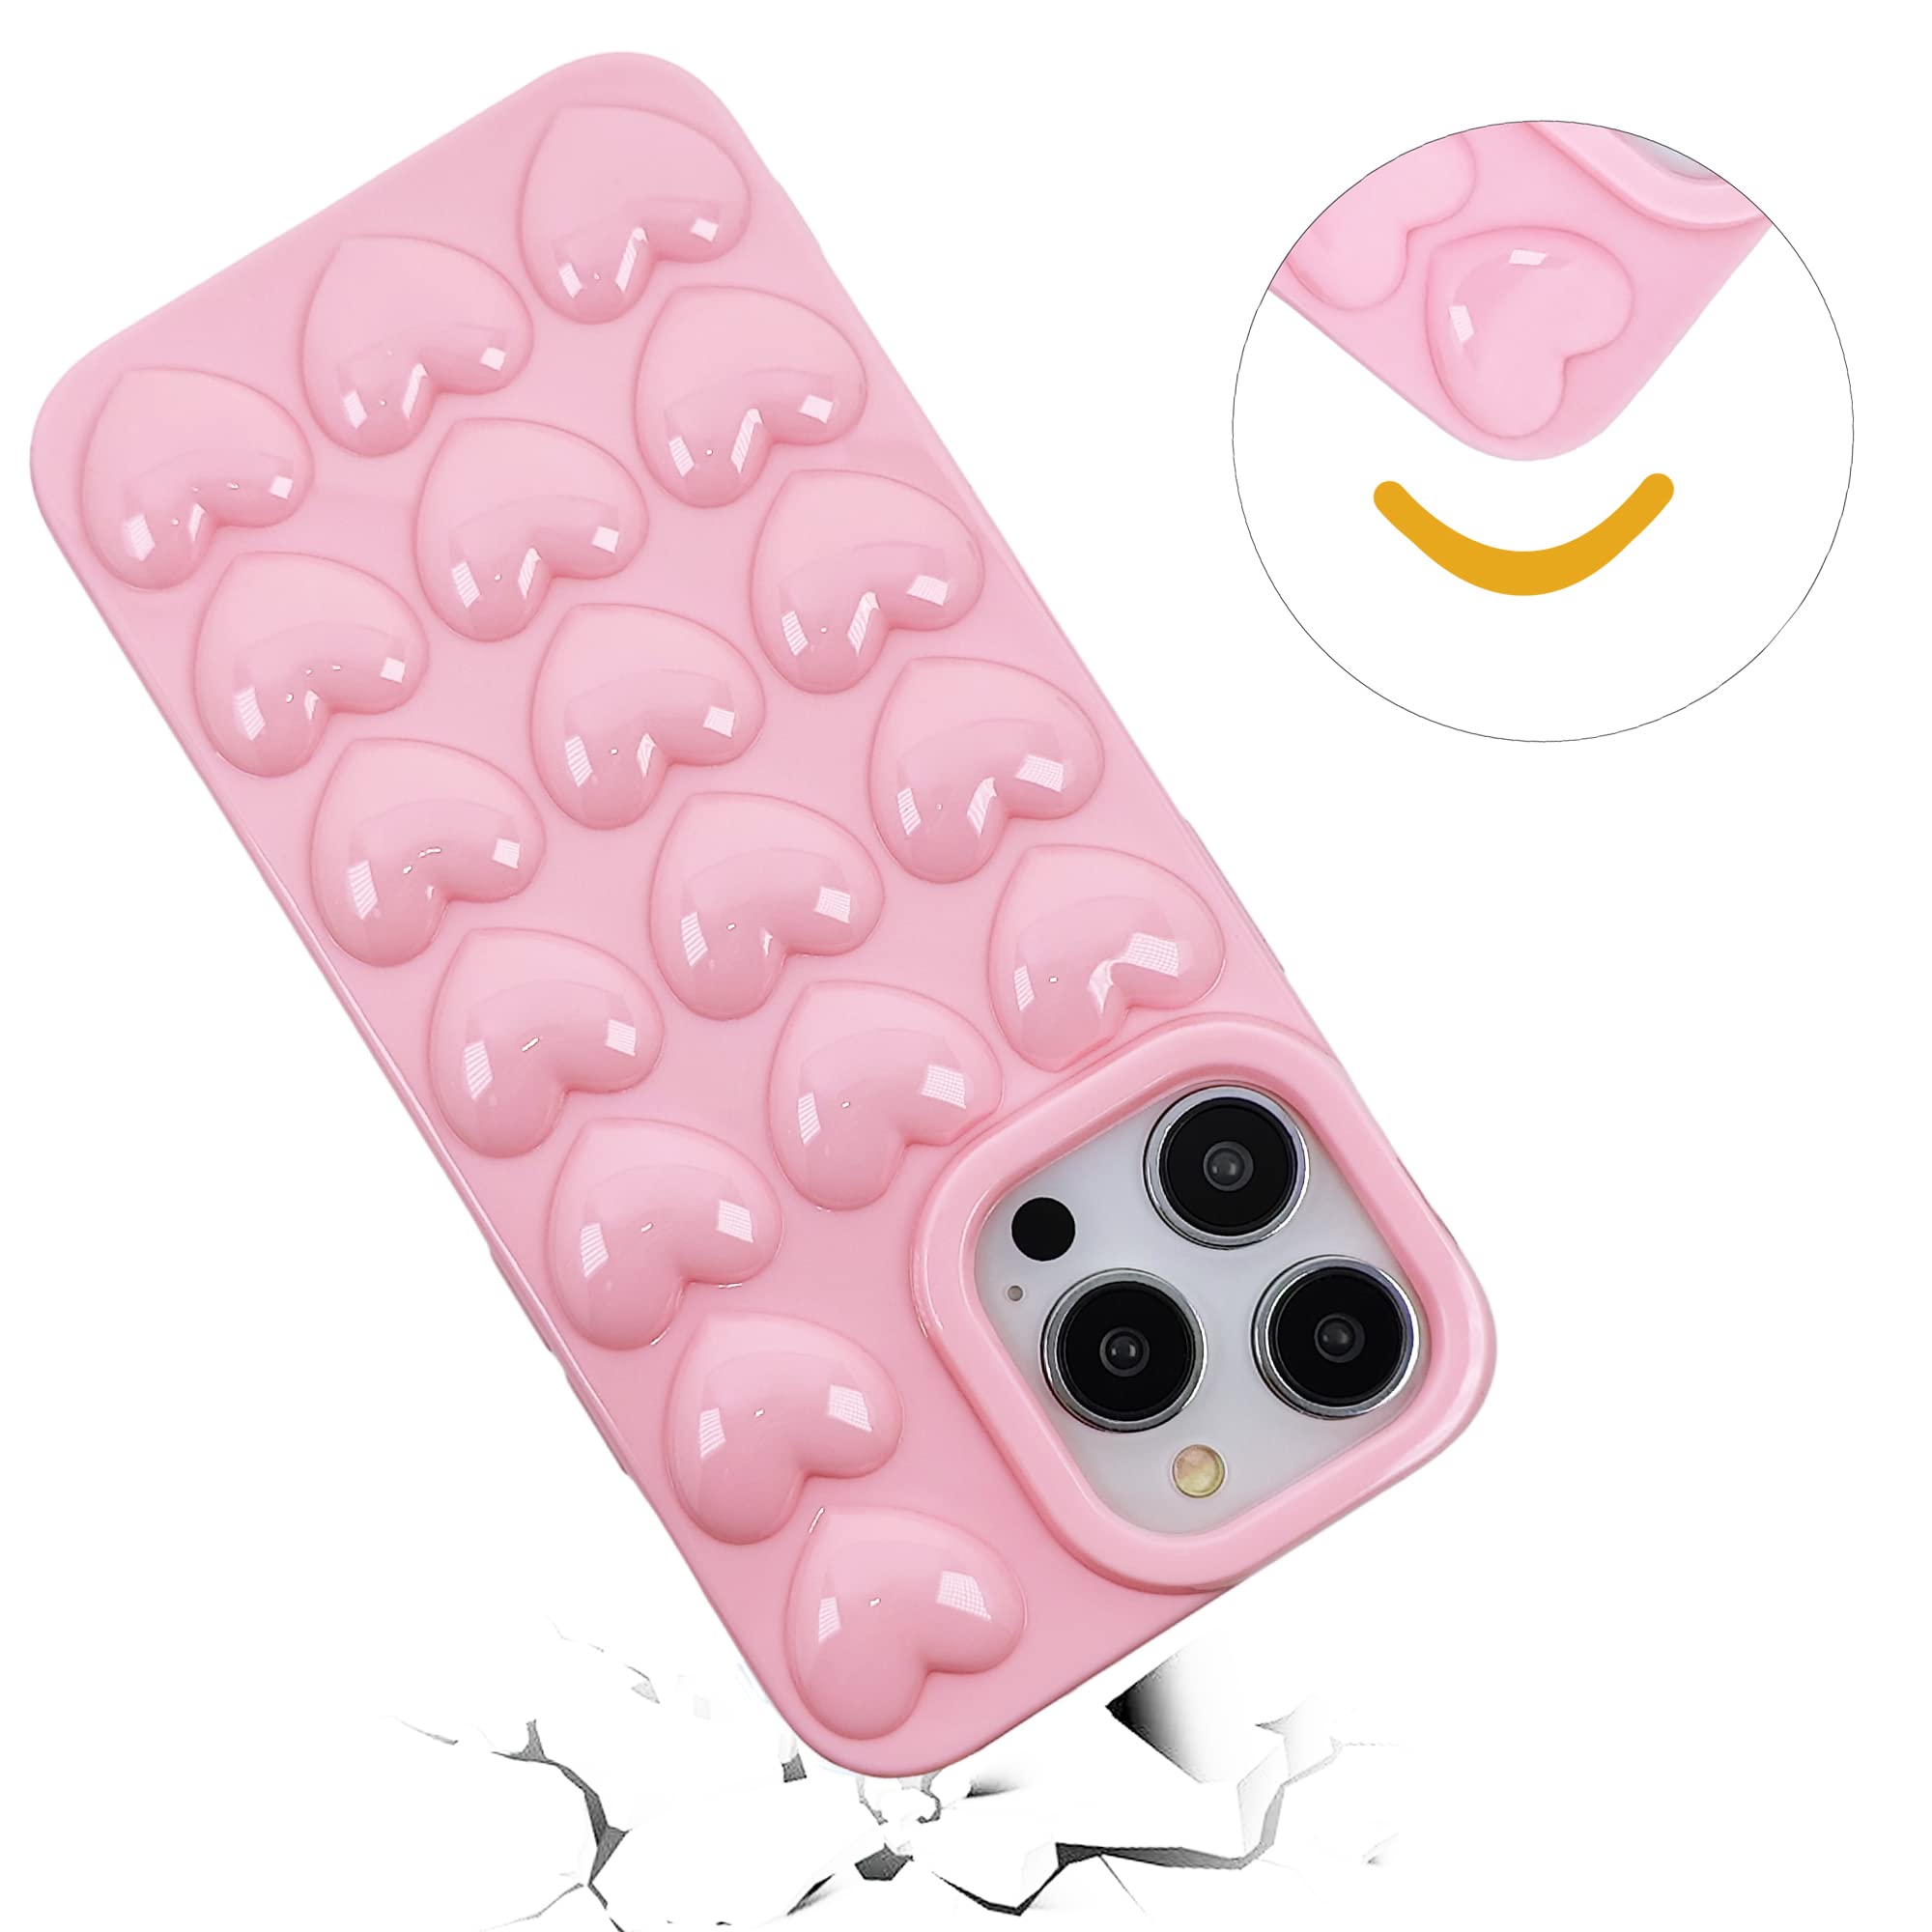 DMaos iPhone 15 Pro Max Case for Women, 3D Pop Bubble Heart Kawaii Gel Cover, Cute Girly for iPhone15 Pro Max 6.7 inch - Pink